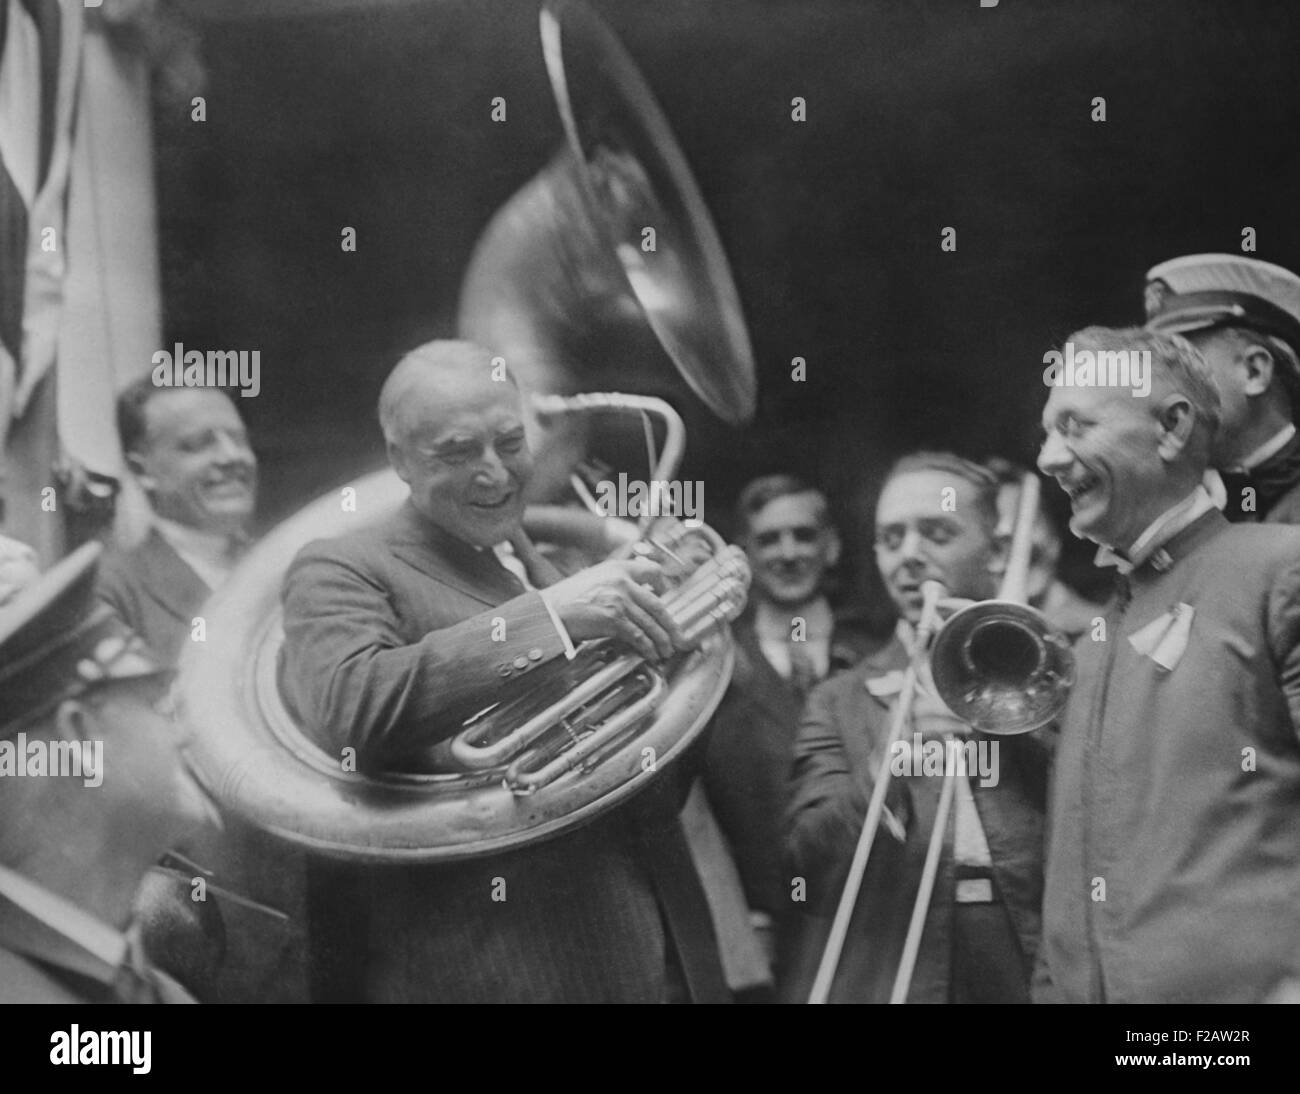 Republican Presidential nominee Warren Harding encircled by a sousaphone. August 1920. This created an amusing image for his 'front porch' campaign in 1920. (CSU 2015 11 1466) Stock Photo